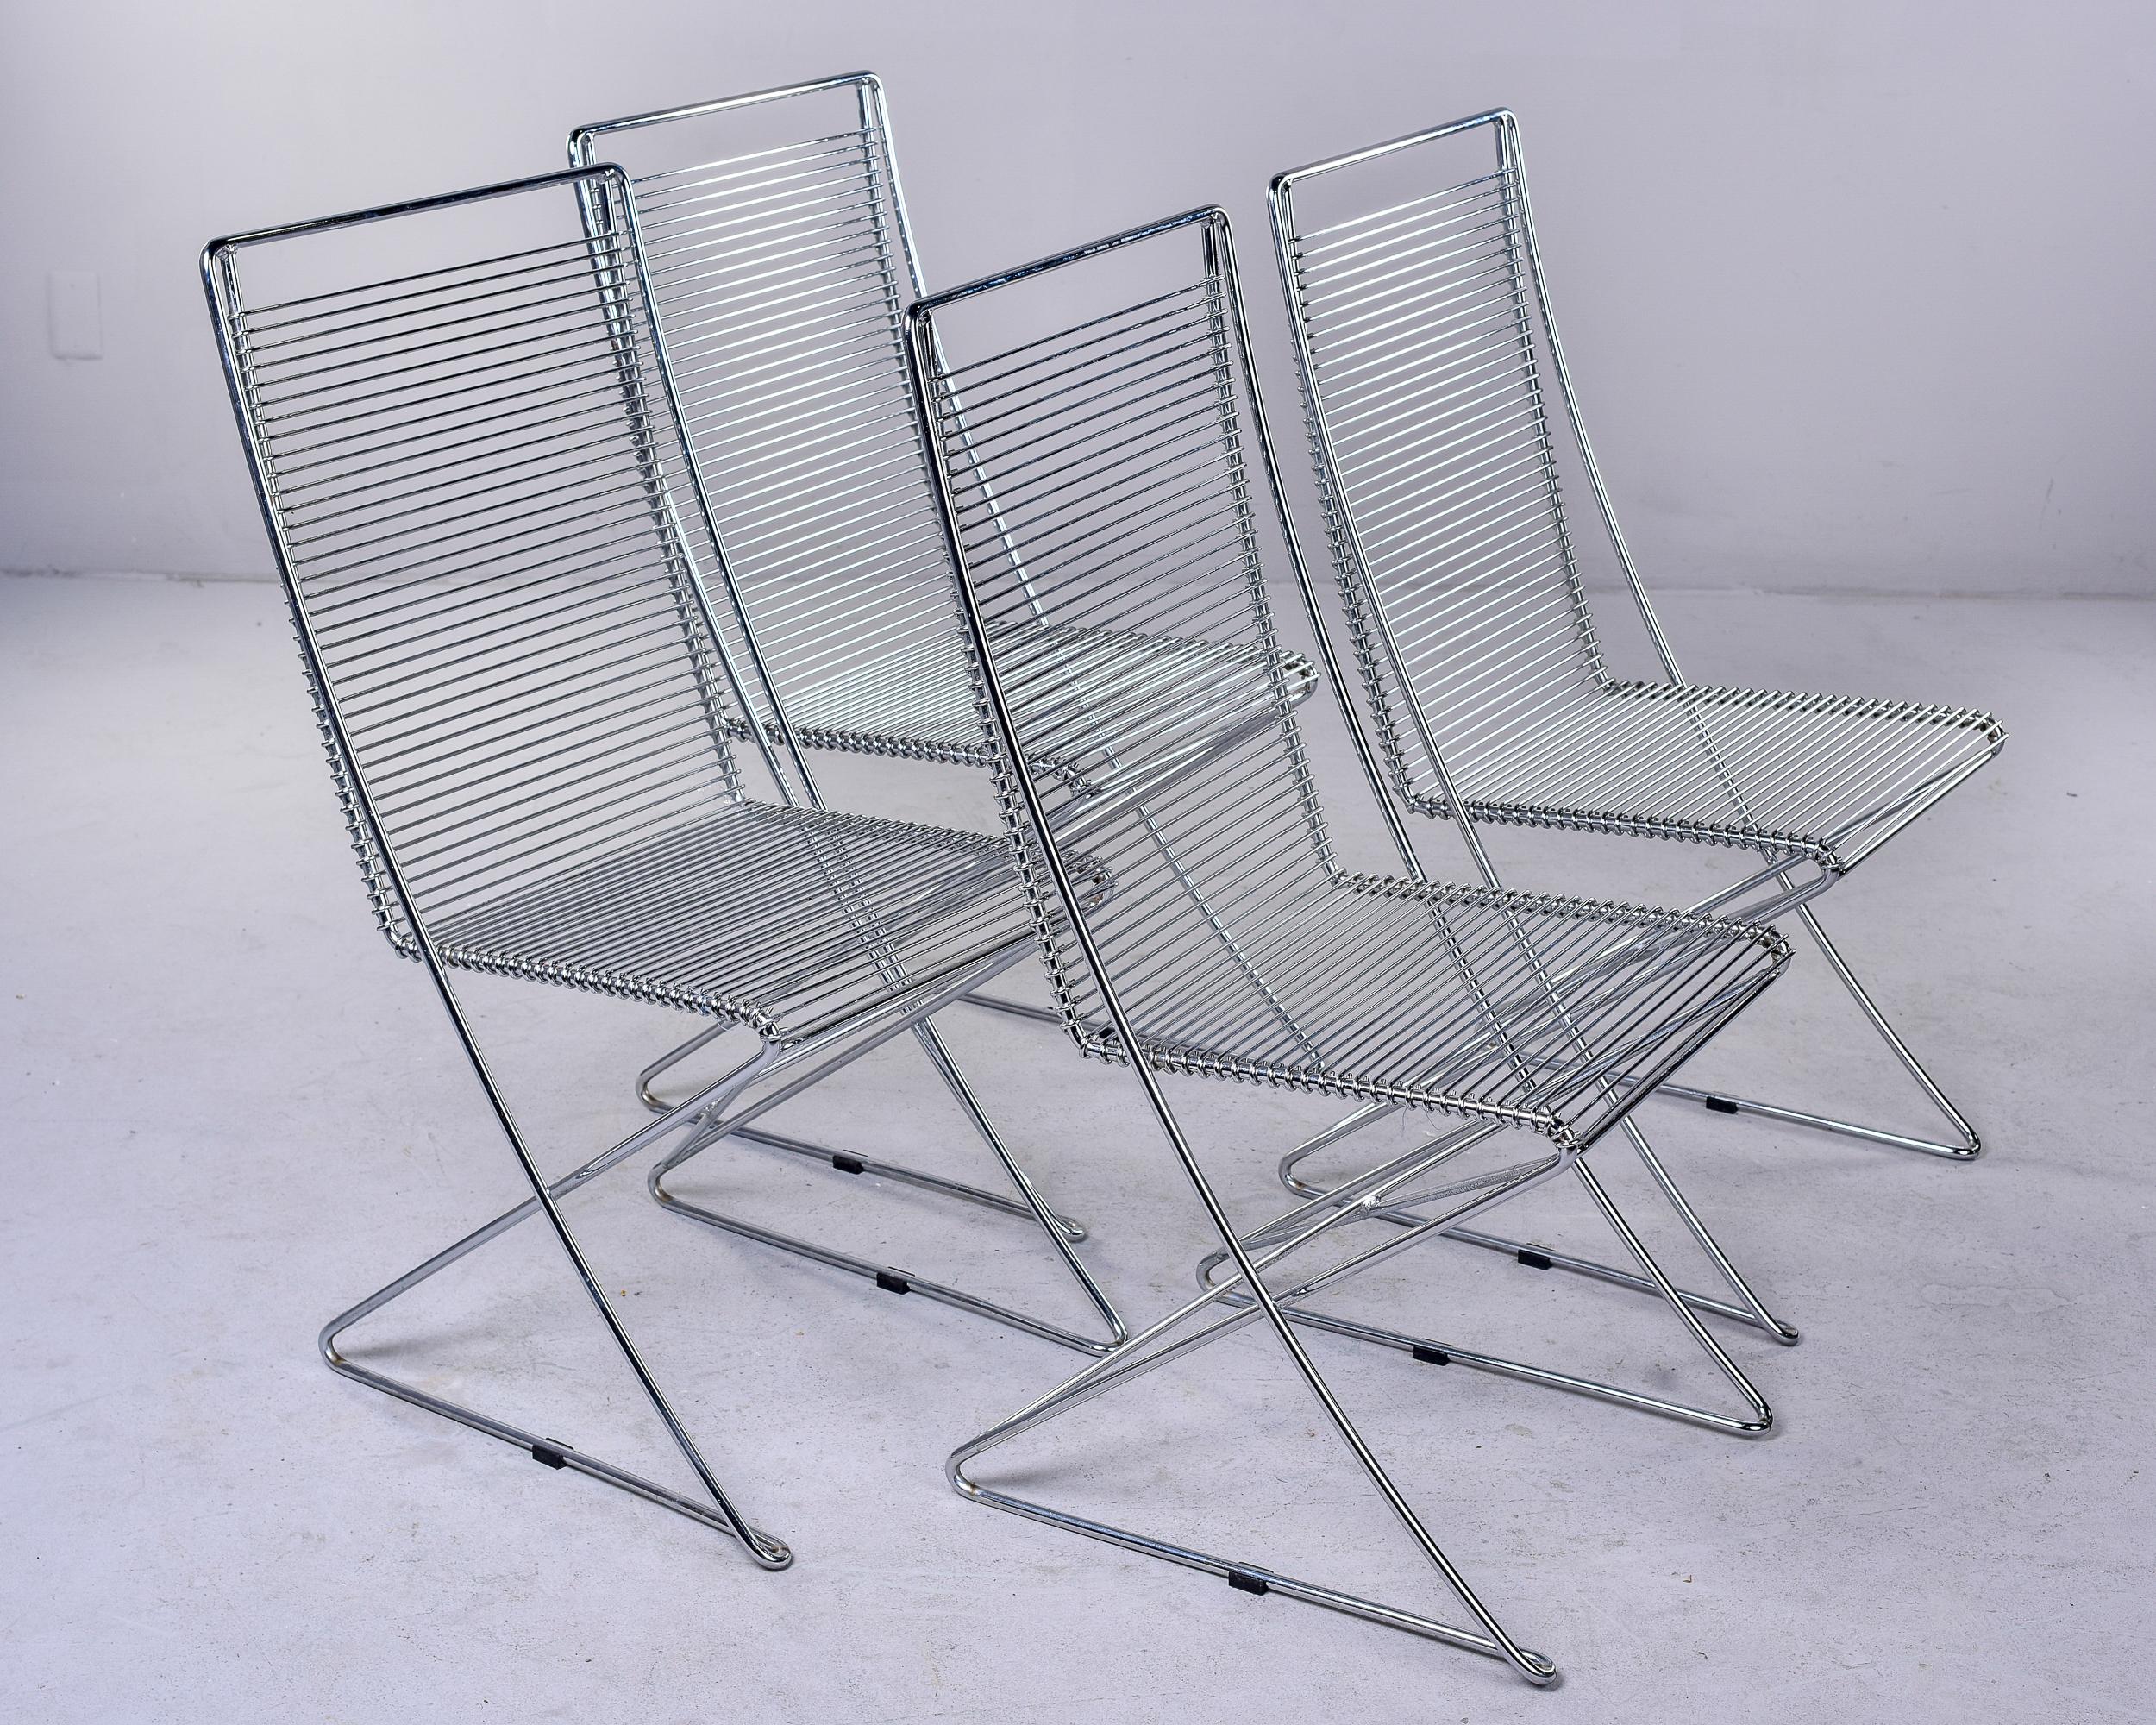 Stainless Steel Set of 4 Mid Century Kreuzschwinger Steel Chairs by Till Behrens for Schlubach